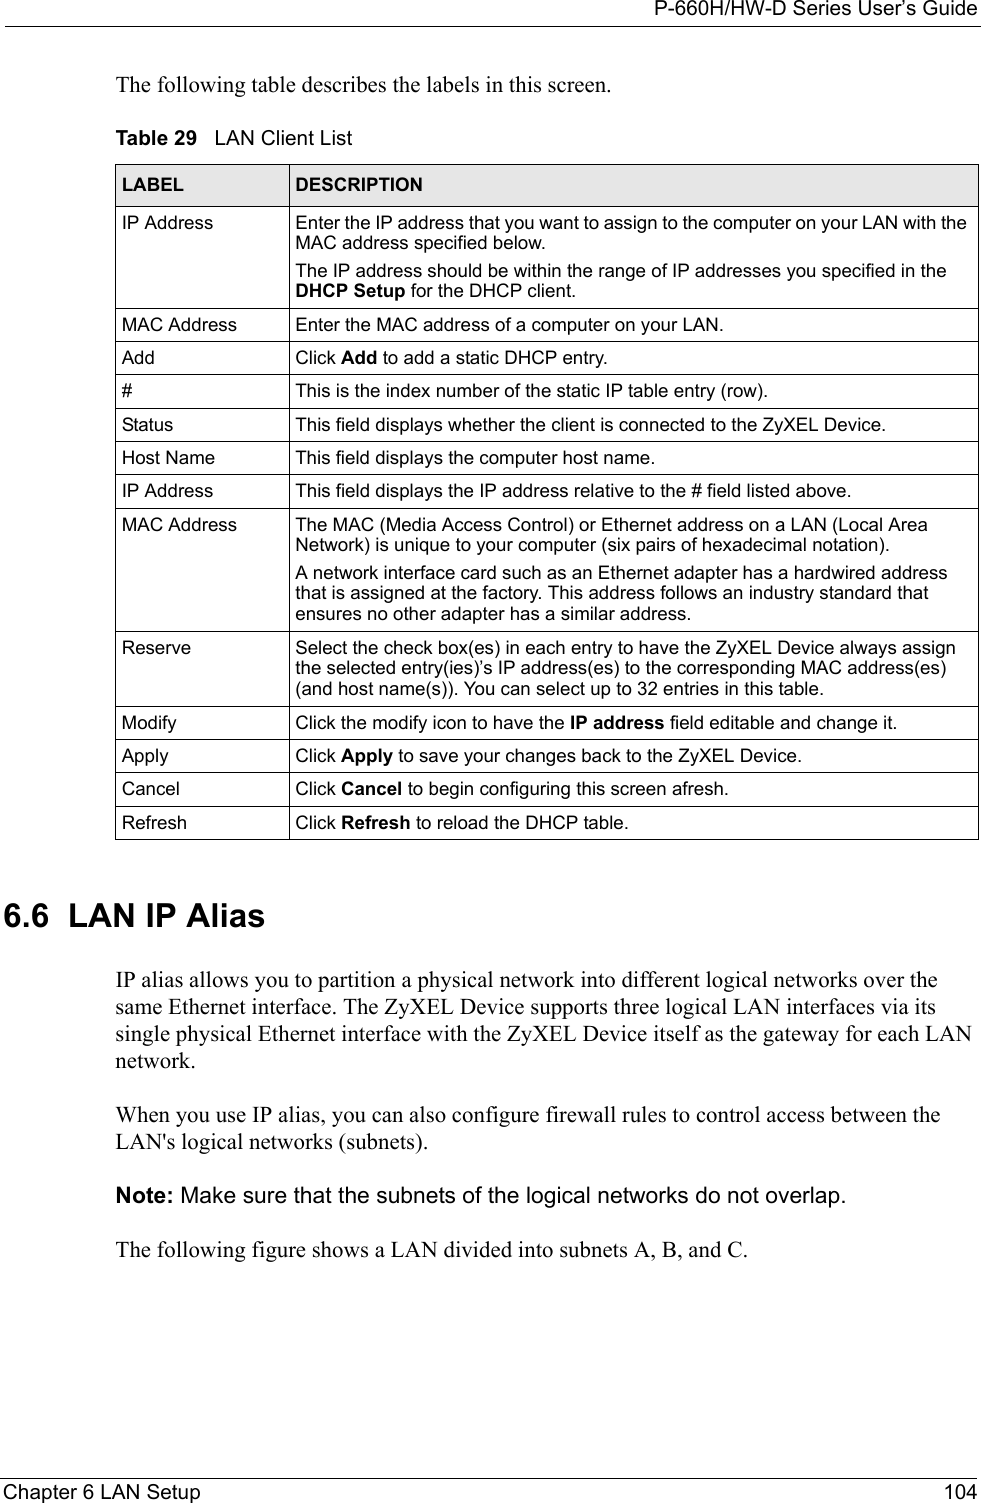 P-660H/HW-D Series User’s GuideChapter 6 LAN Setup 104The following table describes the labels in this screen.6.6  LAN IP AliasIP alias allows you to partition a physical network into different logical networks over the same Ethernet interface. The ZyXEL Device supports three logical LAN interfaces via its single physical Ethernet interface with the ZyXEL Device itself as the gateway for each LAN network.When you use IP alias, you can also configure firewall rules to control access between the LAN&apos;s logical networks (subnets).Note: Make sure that the subnets of the logical networks do not overlap.The following figure shows a LAN divided into subnets A, B, and C.Table 29   LAN Client ListLABEL DESCRIPTIONIP Address Enter the IP address that you want to assign to the computer on your LAN with the MAC address specified below.The IP address should be within the range of IP addresses you specified in the DHCP Setup for the DHCP client.MAC Address Enter the MAC address of a computer on your LAN.Add Click Add to add a static DHCP entry. # This is the index number of the static IP table entry (row).Status This field displays whether the client is connected to the ZyXEL Device.Host Name  This field displays the computer host name.IP Address This field displays the IP address relative to the # field listed above.MAC Address The MAC (Media Access Control) or Ethernet address on a LAN (Local Area Network) is unique to your computer (six pairs of hexadecimal notation).A network interface card such as an Ethernet adapter has a hardwired address that is assigned at the factory. This address follows an industry standard that ensures no other adapter has a similar address.Reserve Select the check box(es) in each entry to have the ZyXEL Device always assign the selected entry(ies)’s IP address(es) to the corresponding MAC address(es) (and host name(s)). You can select up to 32 entries in this table. Modify Click the modify icon to have the IP address field editable and change it.Apply Click Apply to save your changes back to the ZyXEL Device.Cancel Click Cancel to begin configuring this screen afresh.Refresh Click Refresh to reload the DHCP table.